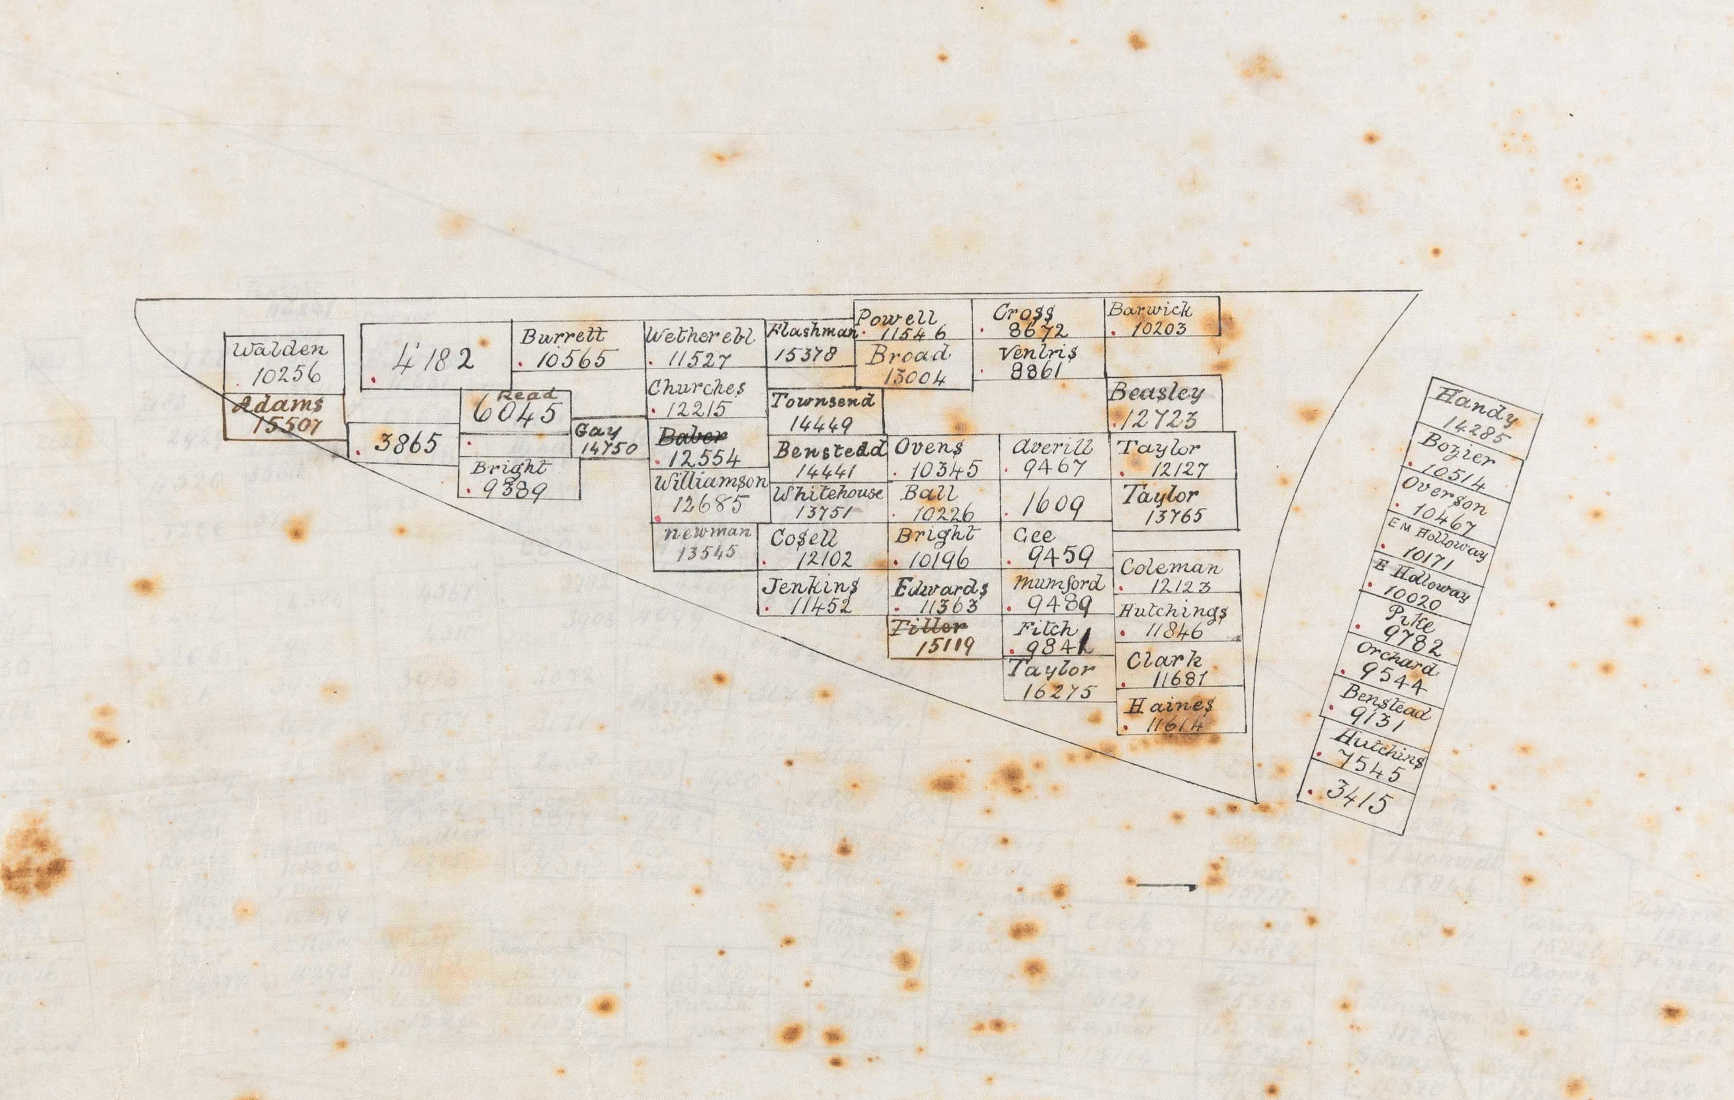 Plan of reading cemetery showing plot with numbers and names.